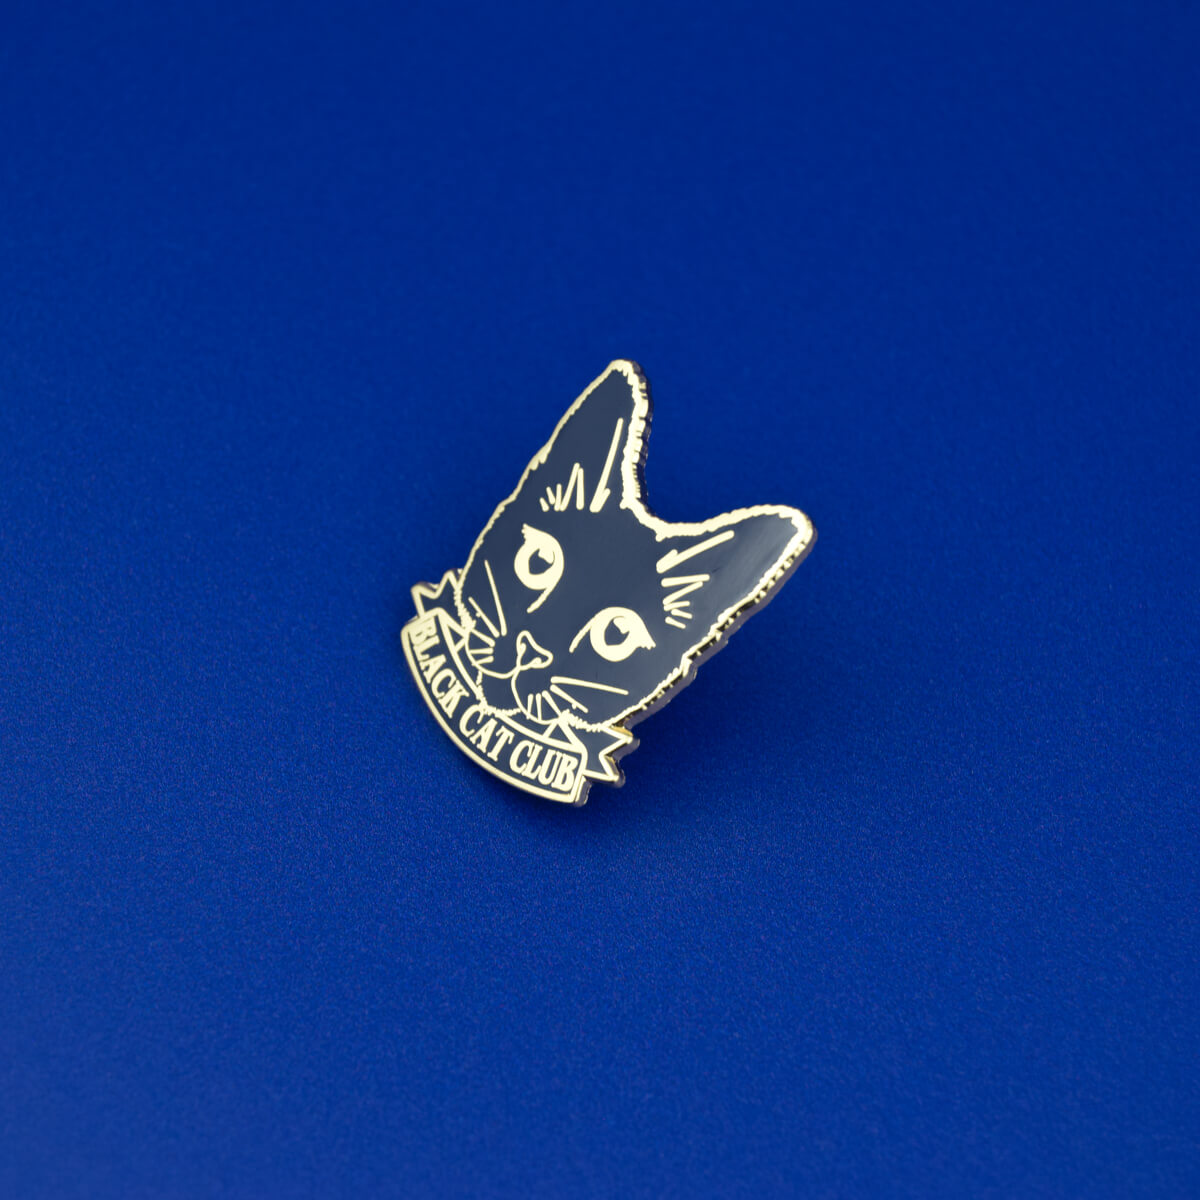 Black Cat Club Pin - Occult Patches & Pins